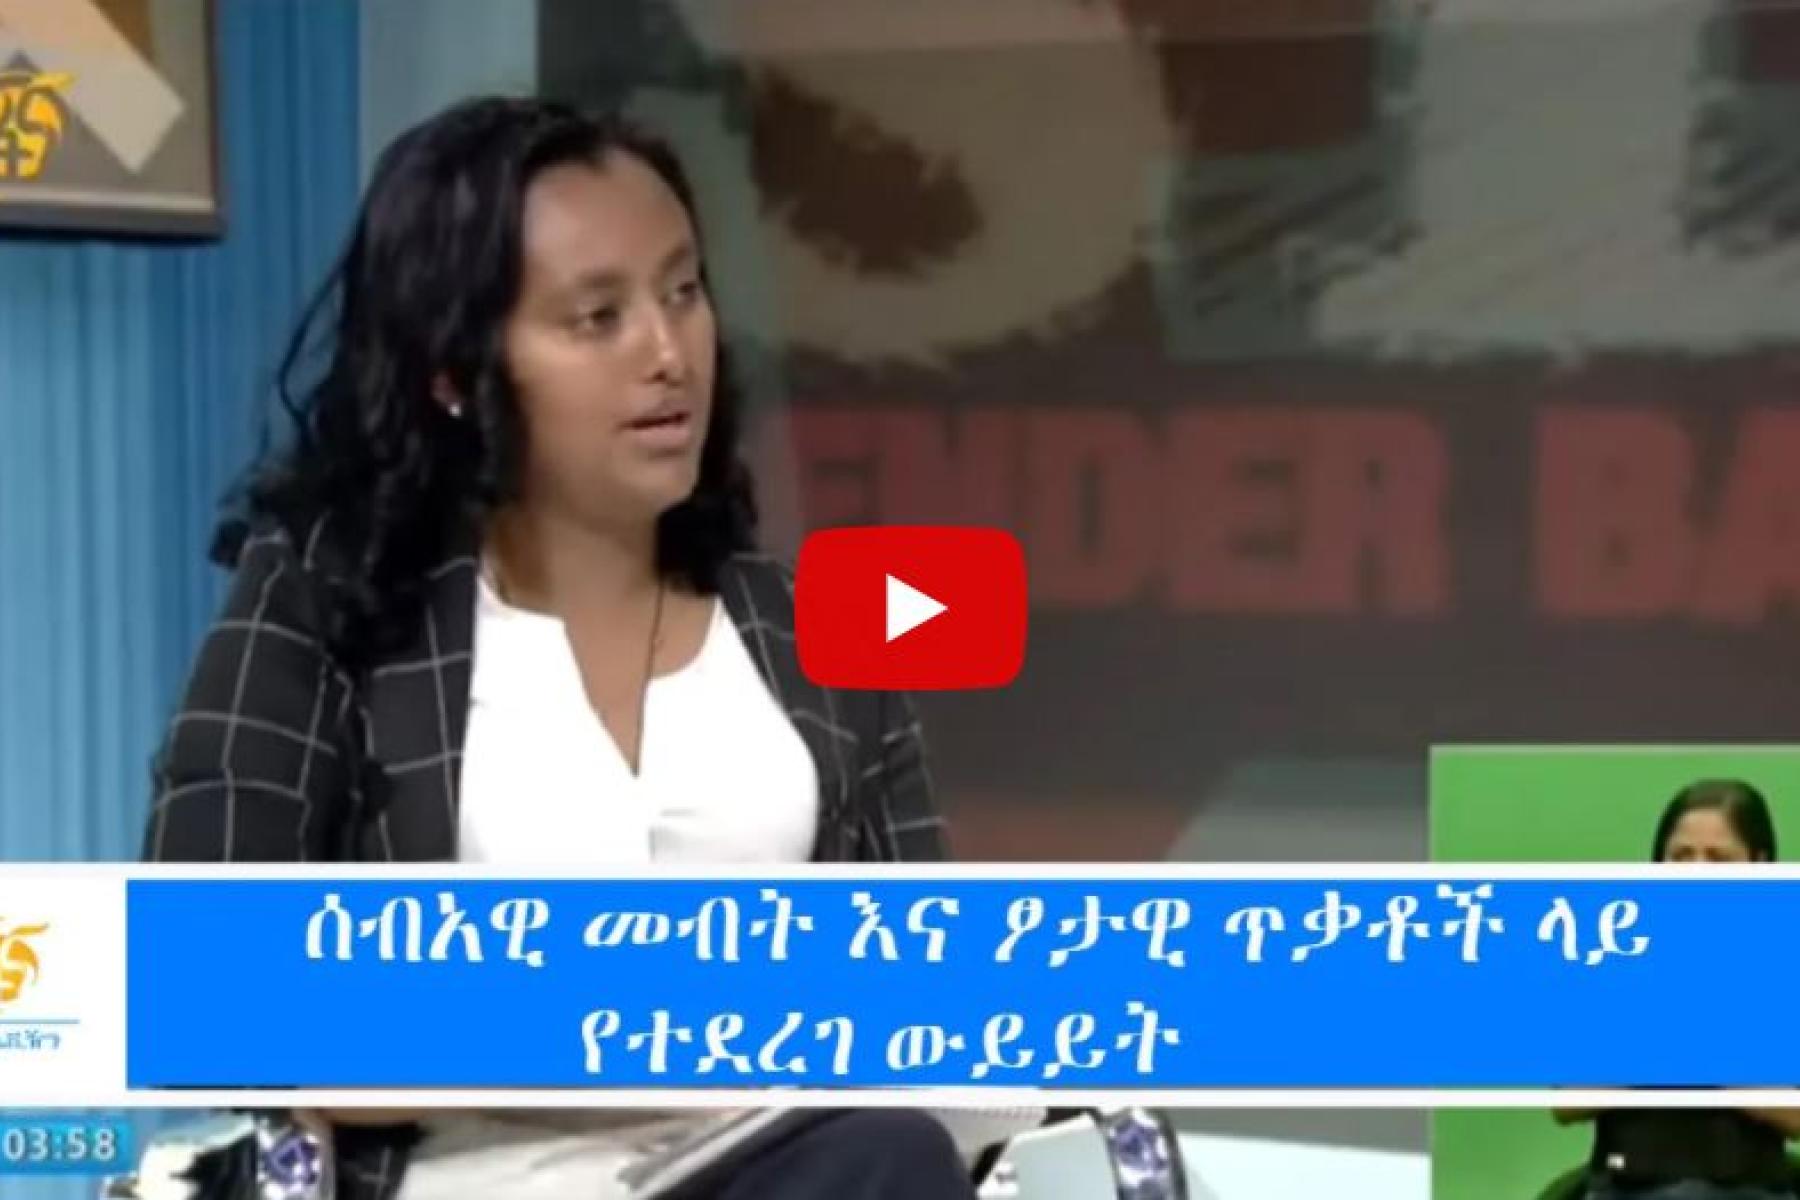 16 days of activism and the International Human Rights days in Ethiopia